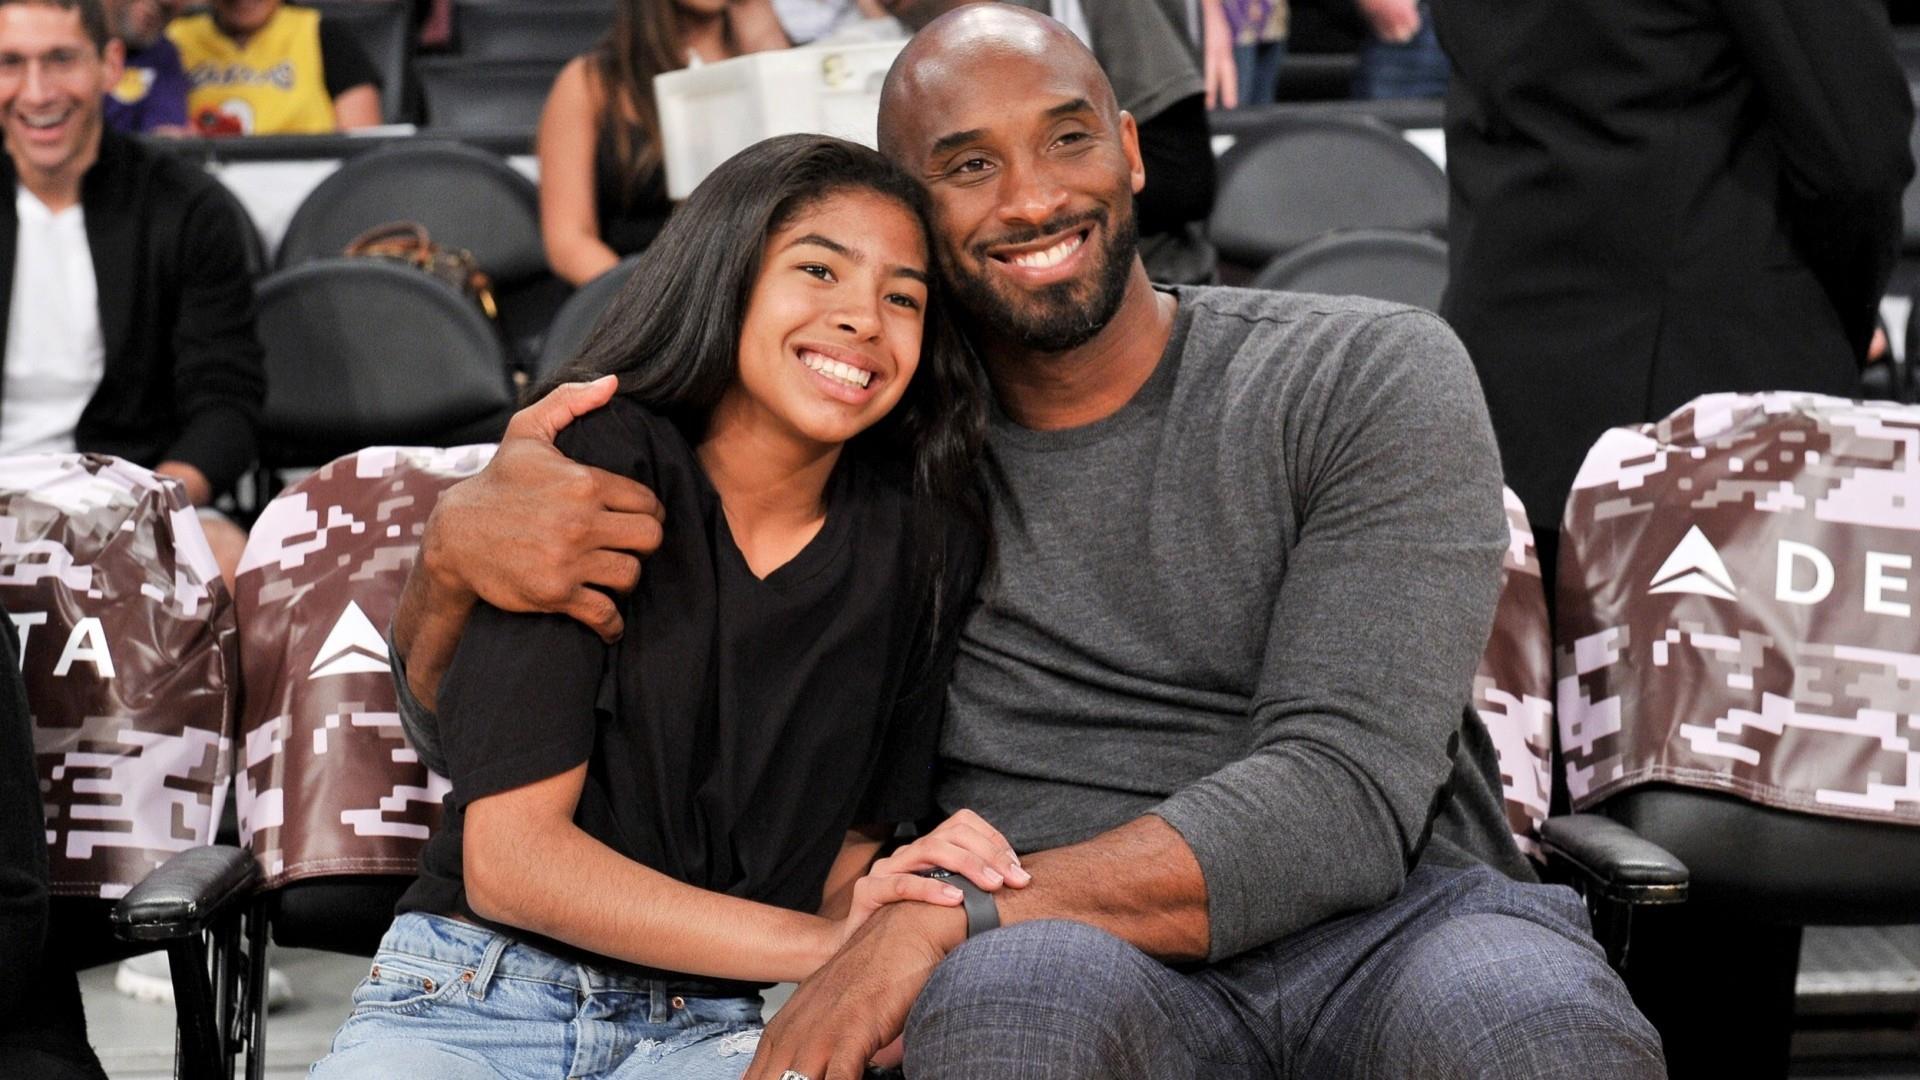 Gianna Bryant, 13, dies in helicopter crash with father Kobe Bryant